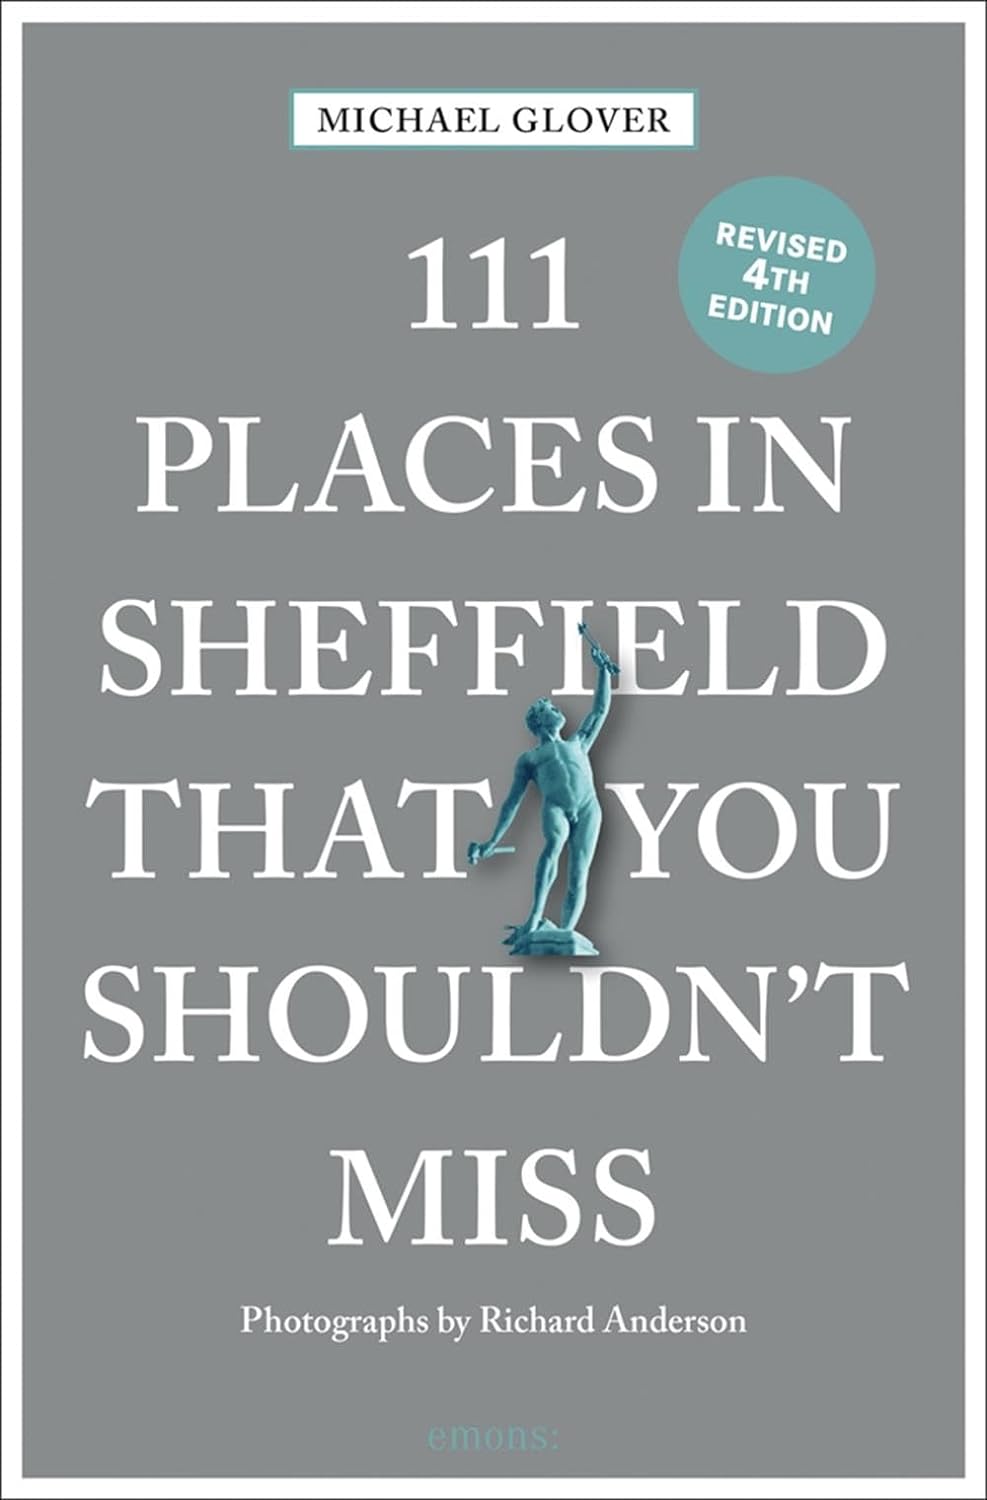 Online bestellen: Reisgids 111 places in Places in Sheffield That You Shouldn't Miss | Emons